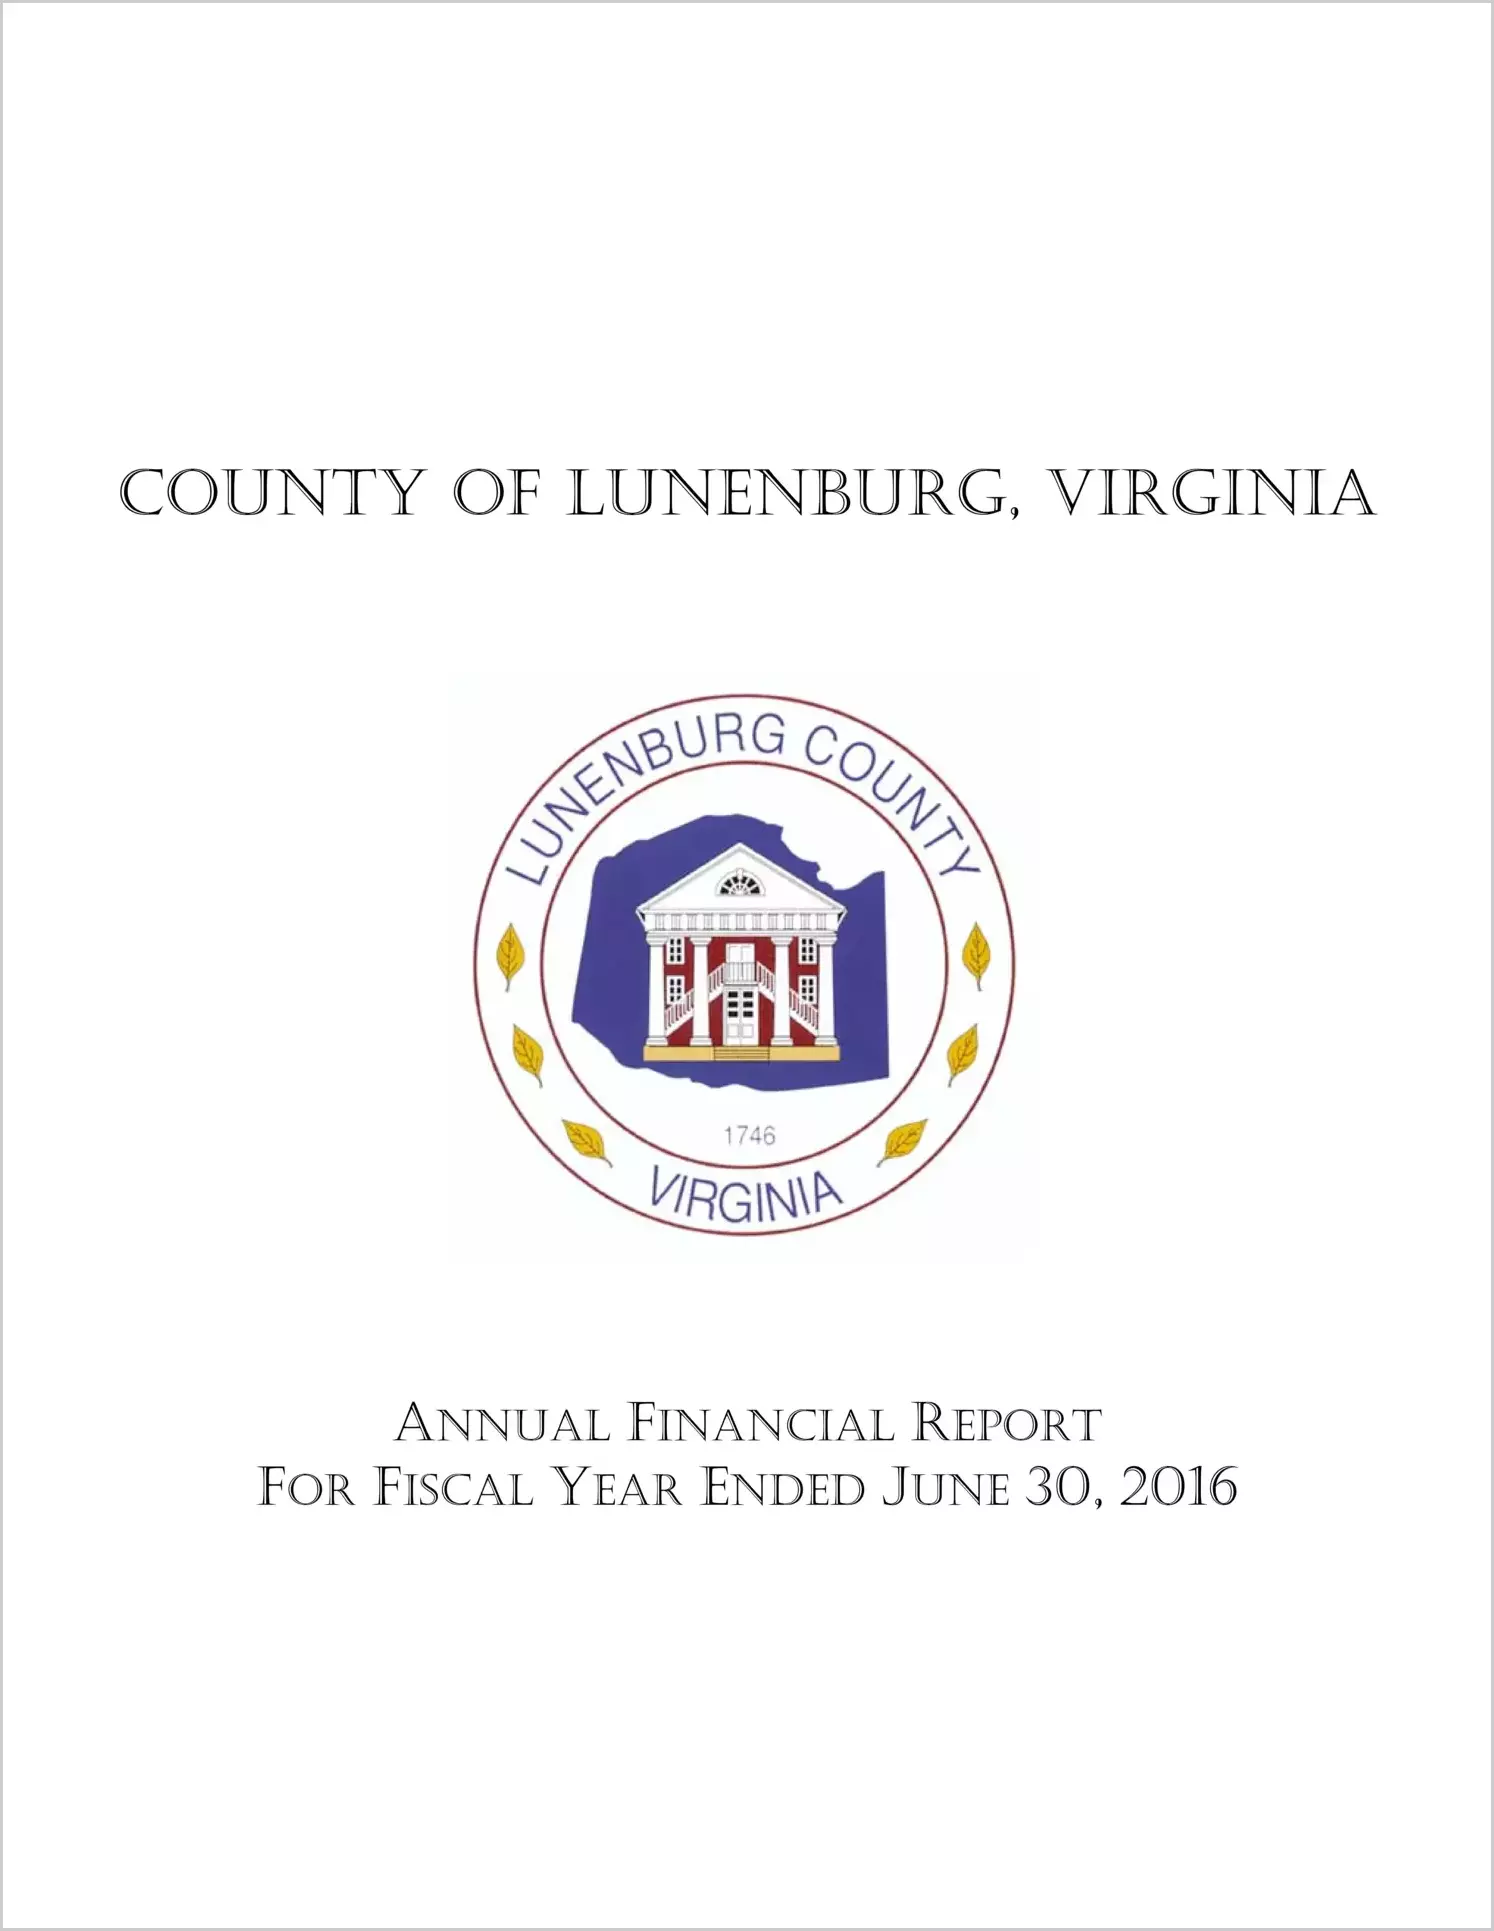 2016 Annual Financial Report for County of Lunenburg